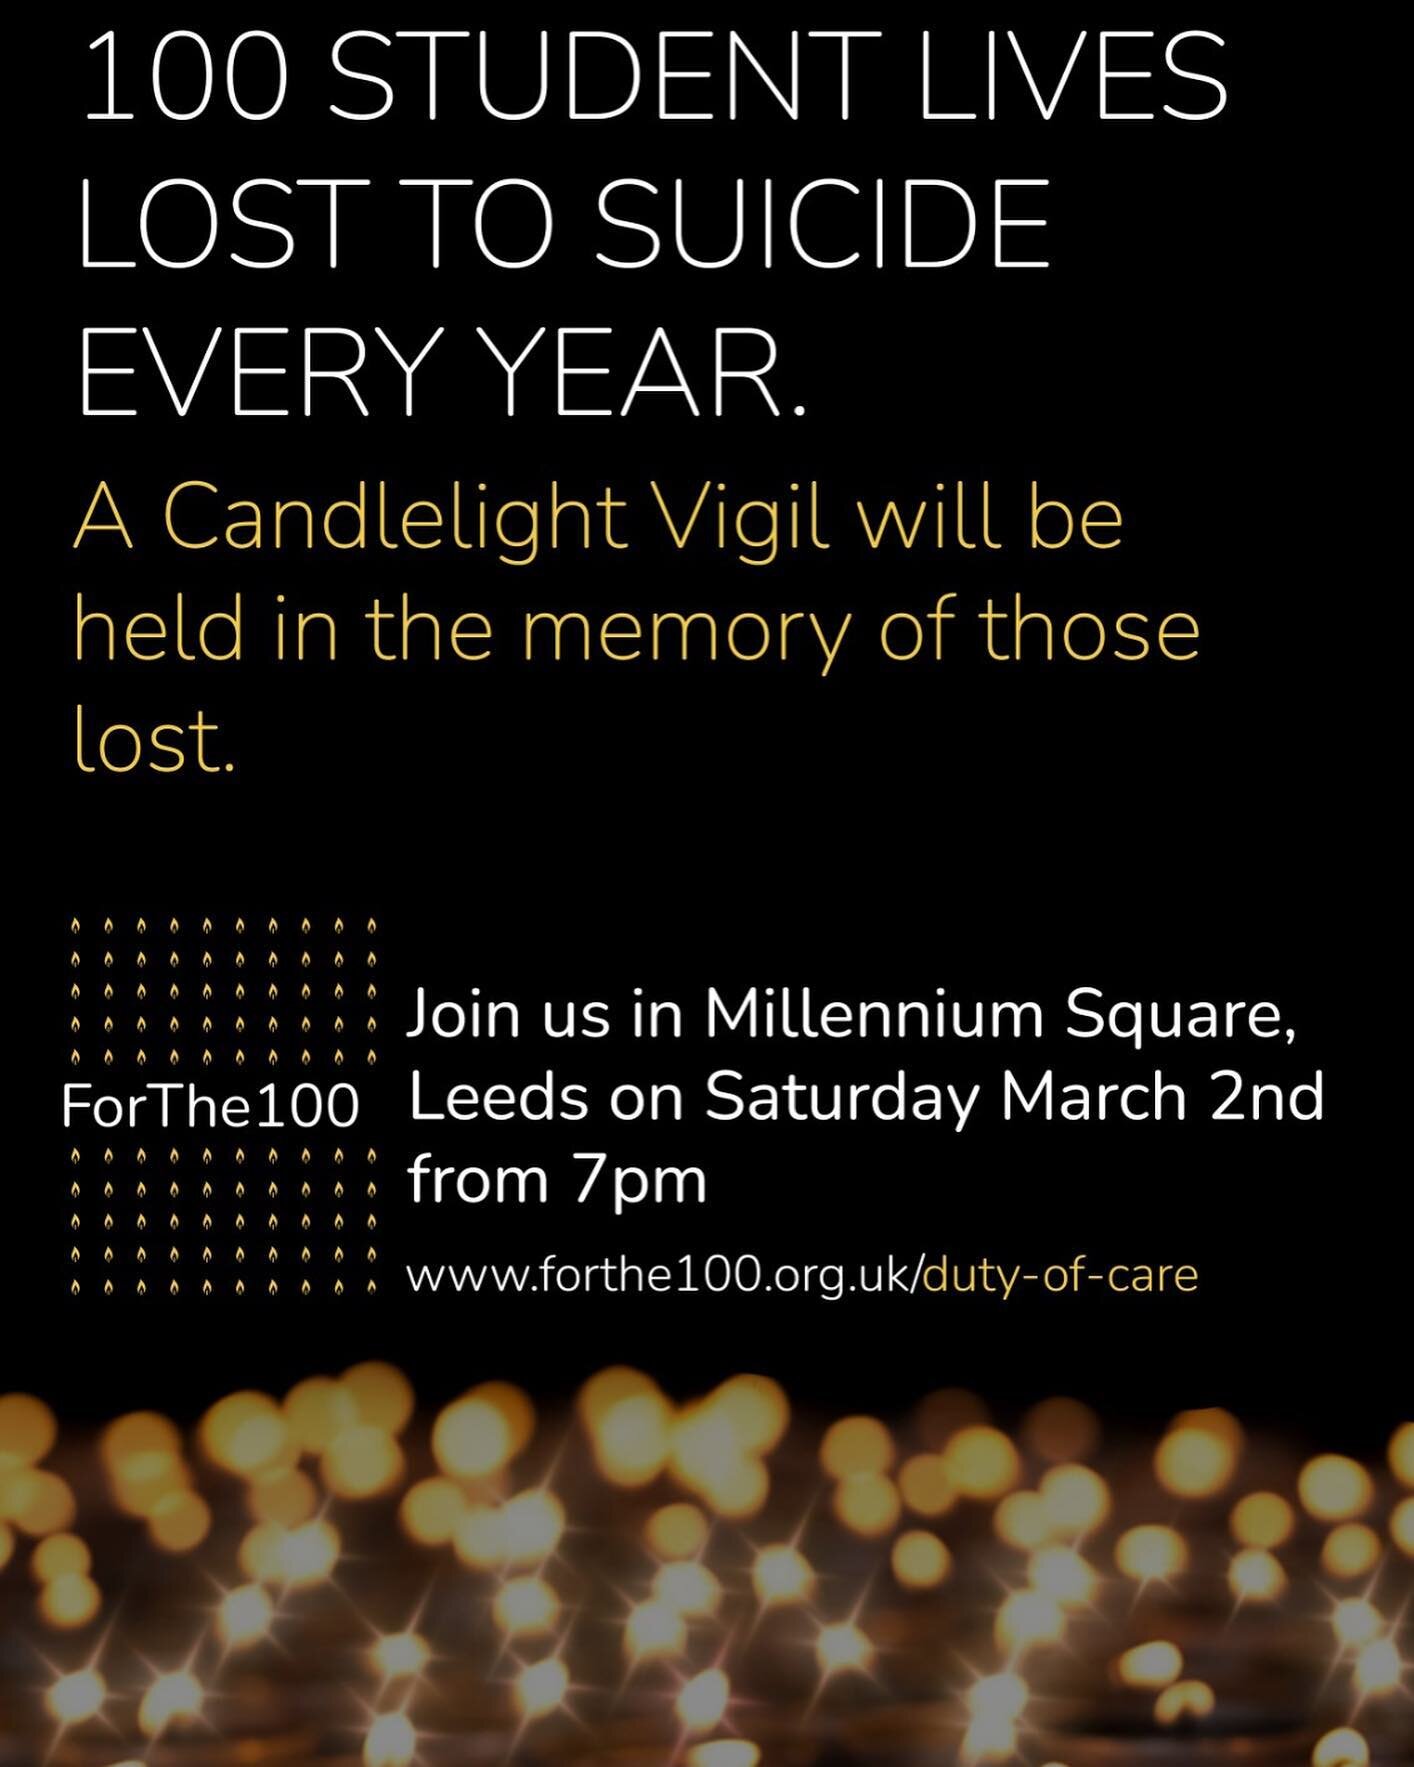 💛ANNOUNCEMENT💛 

Saturday March 2nd, 7pm we will be hosting our annual candlelight vigil.

Join us in Millennium Square, Leeds City Centre, to remember those lost to suicide and to stand in solidarity with those suffering. 

We hope to start breaki